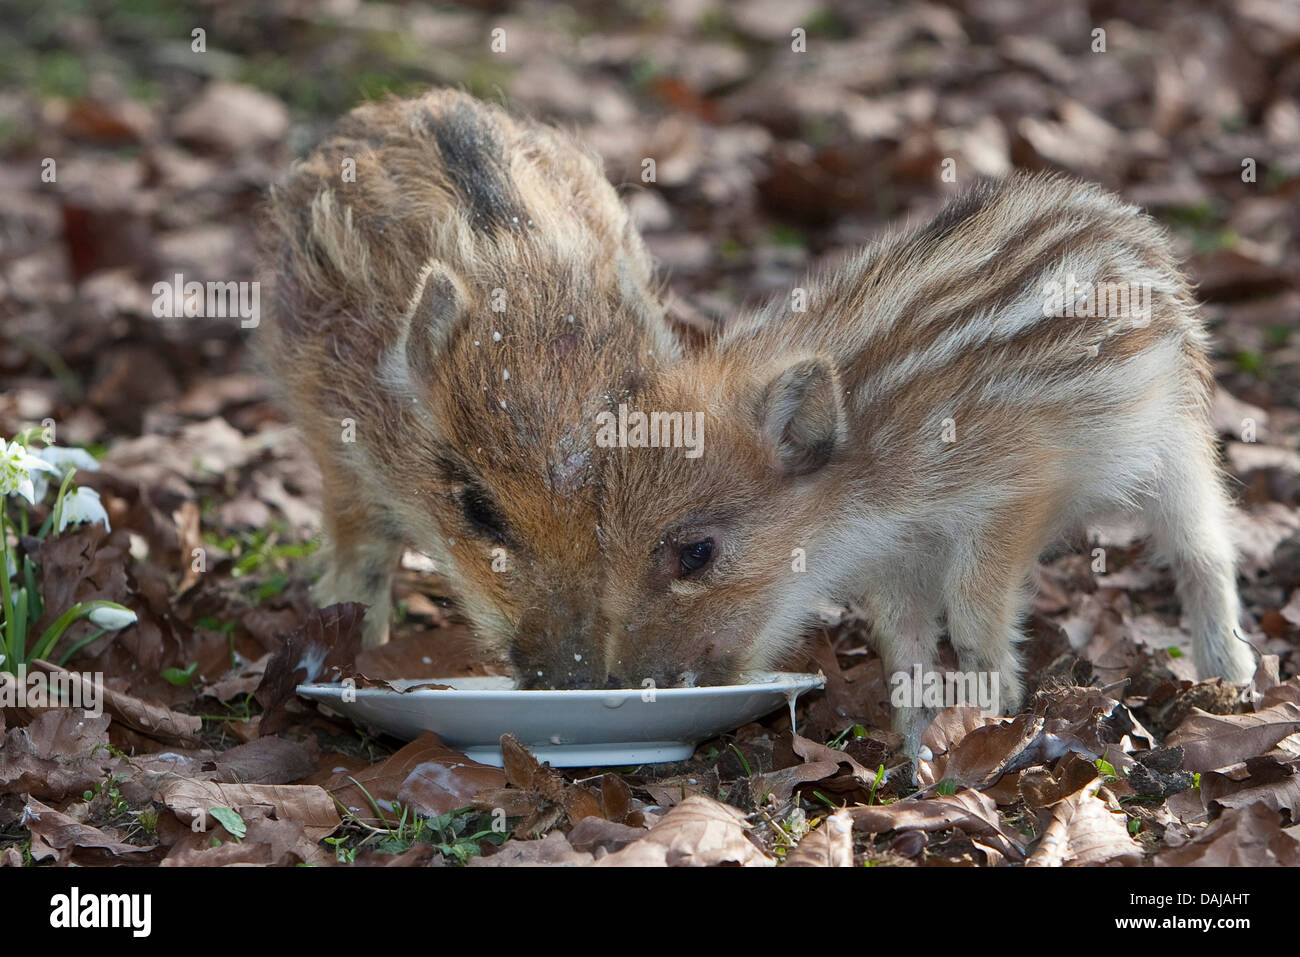 wild boar, pig, wild boar (Sus scrofa), gentle shotes feeding together from a plate , Germany Stock Photo